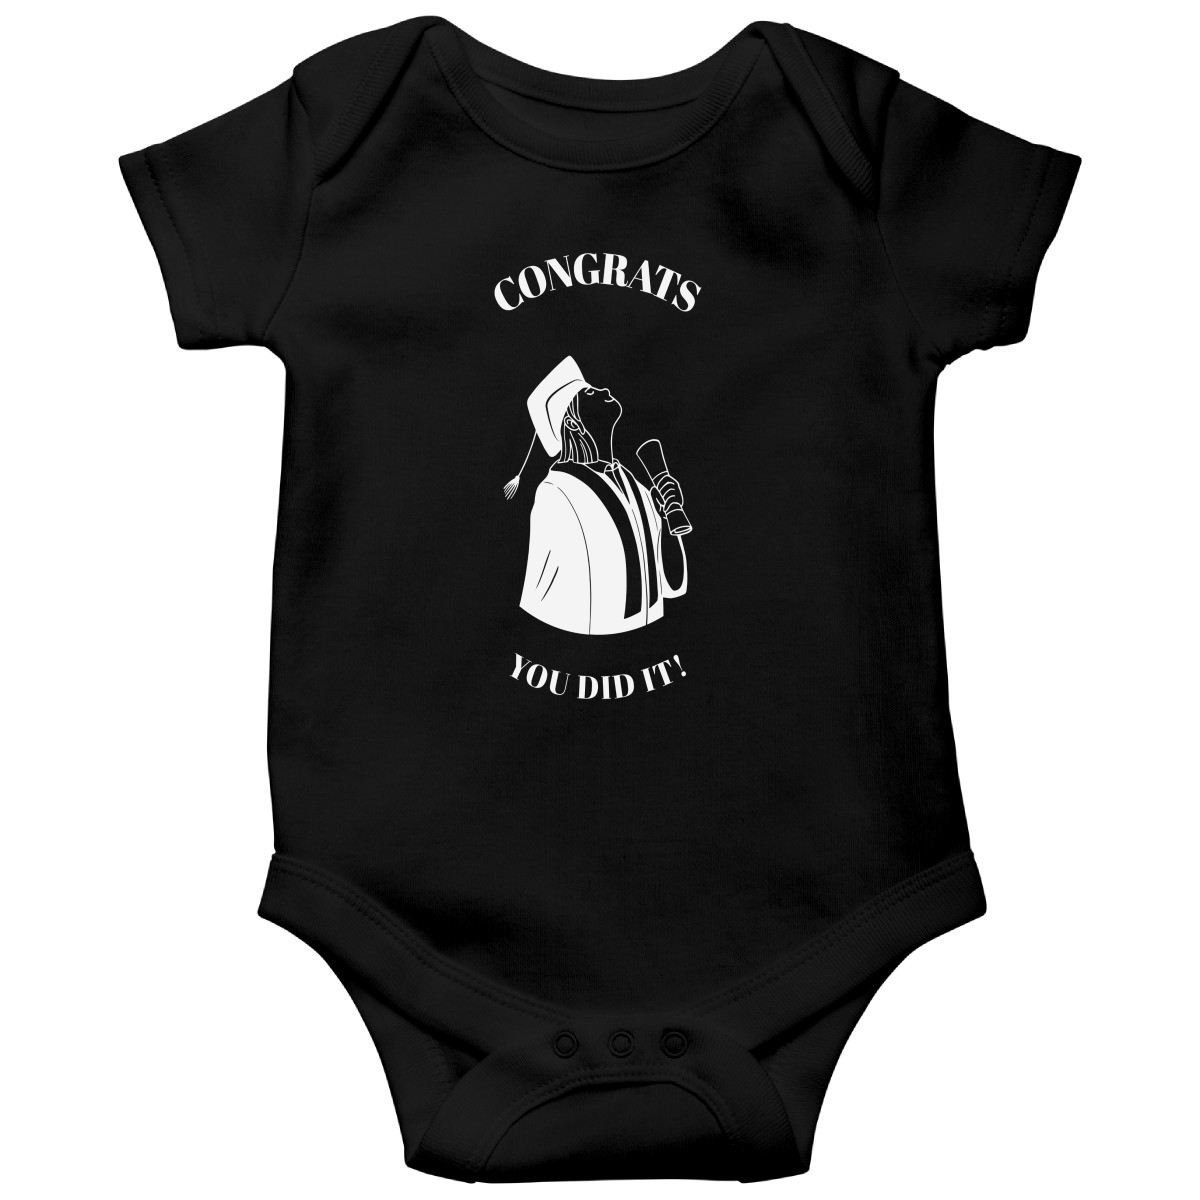 Congrats You Did It! Baby Bodysuits